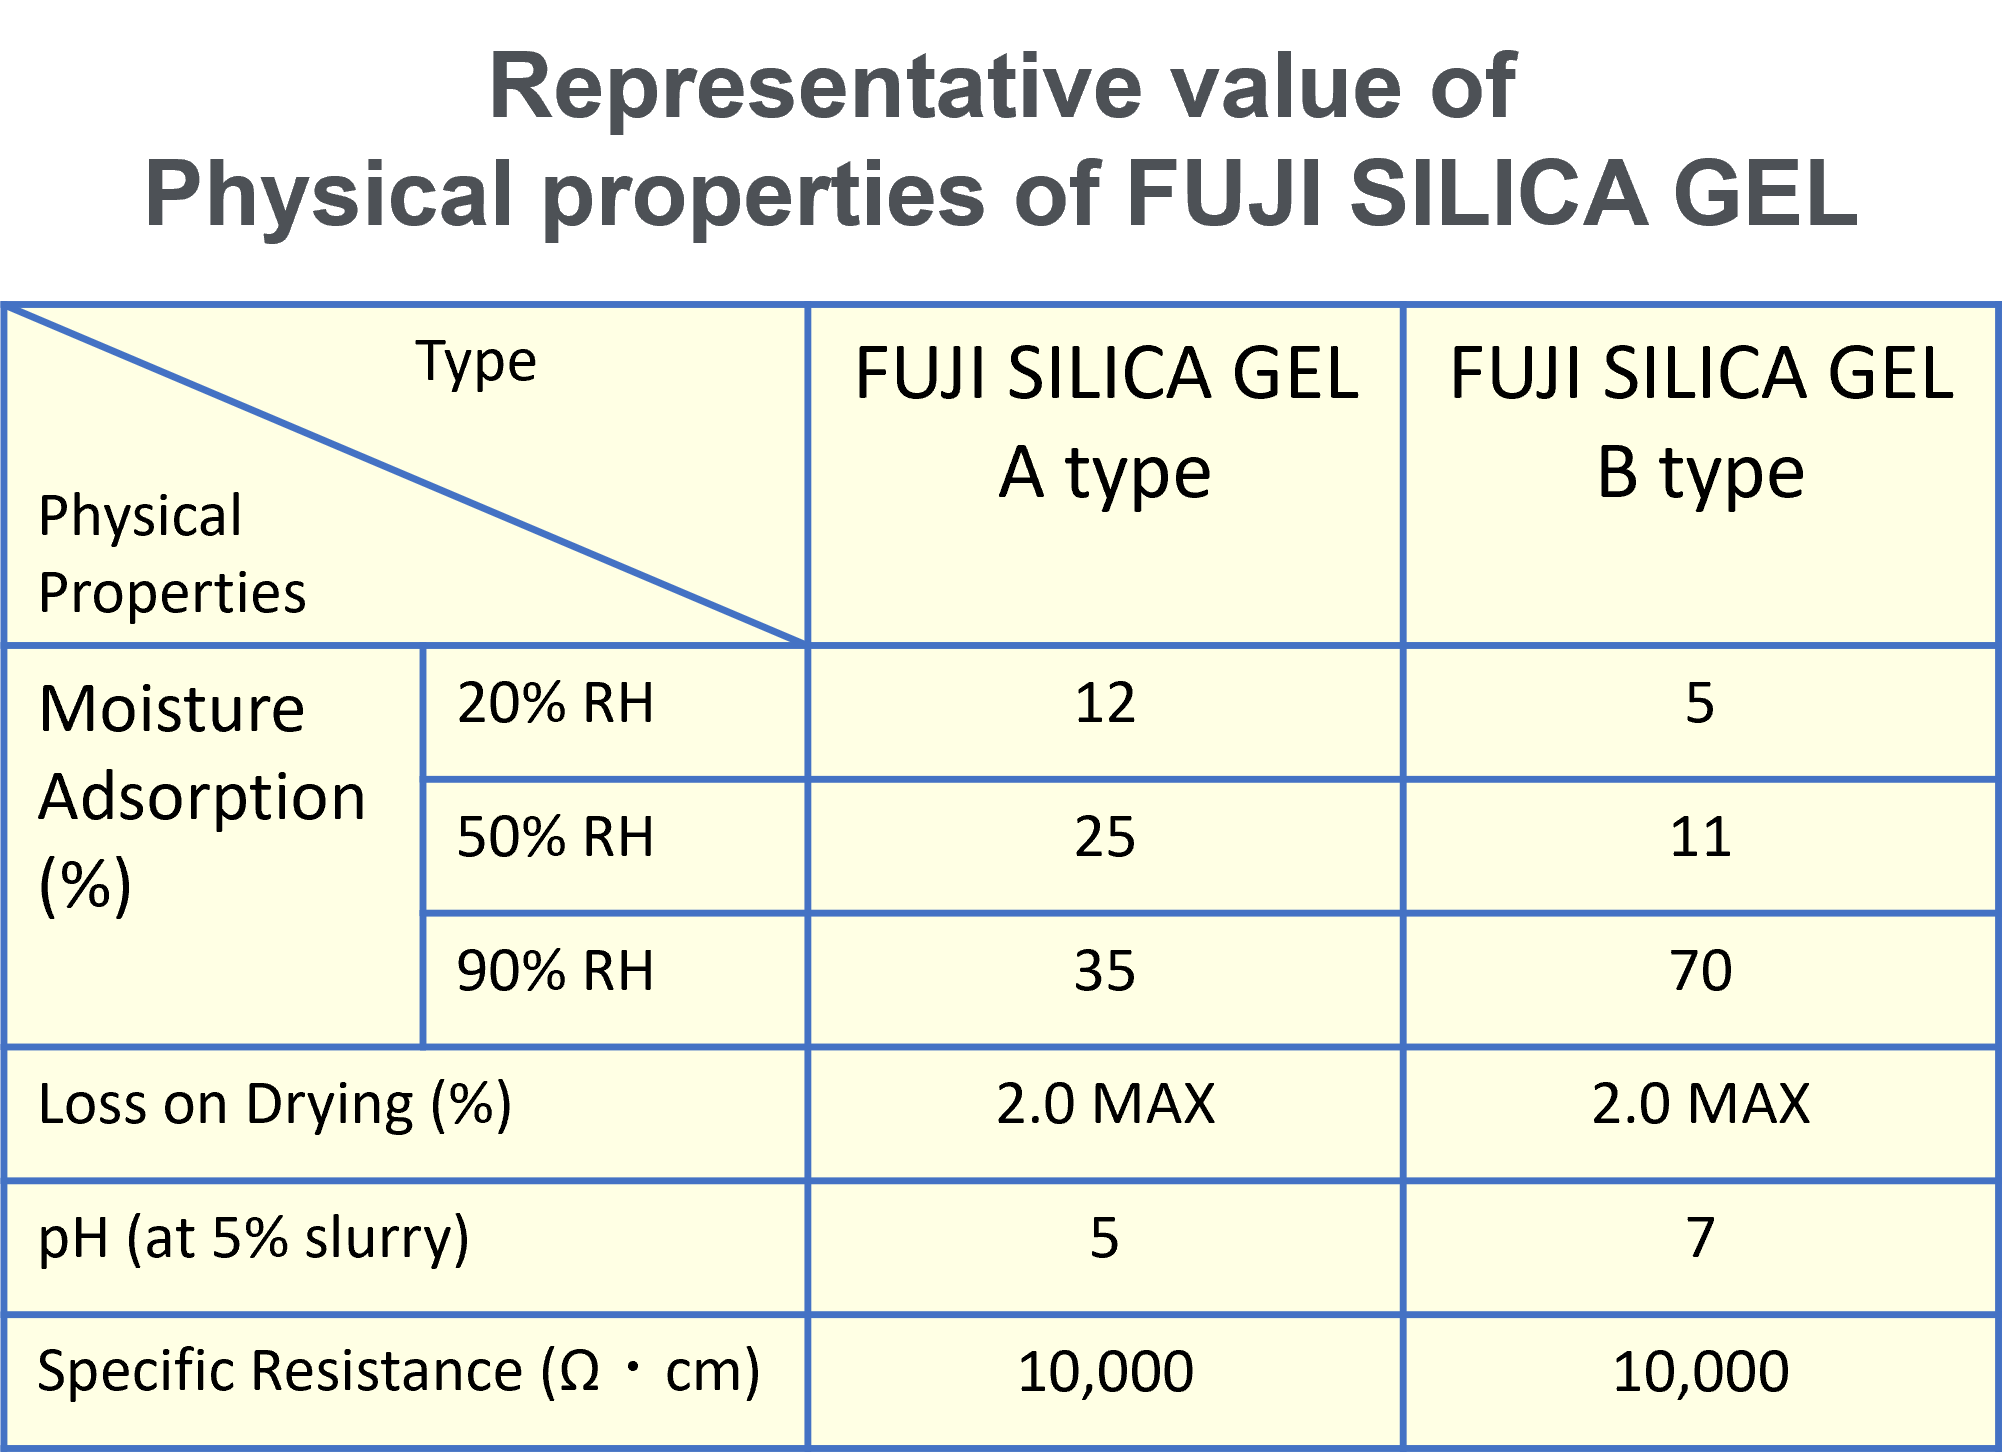 Physical Properties and Characteristics: A type and B type Silica Gel